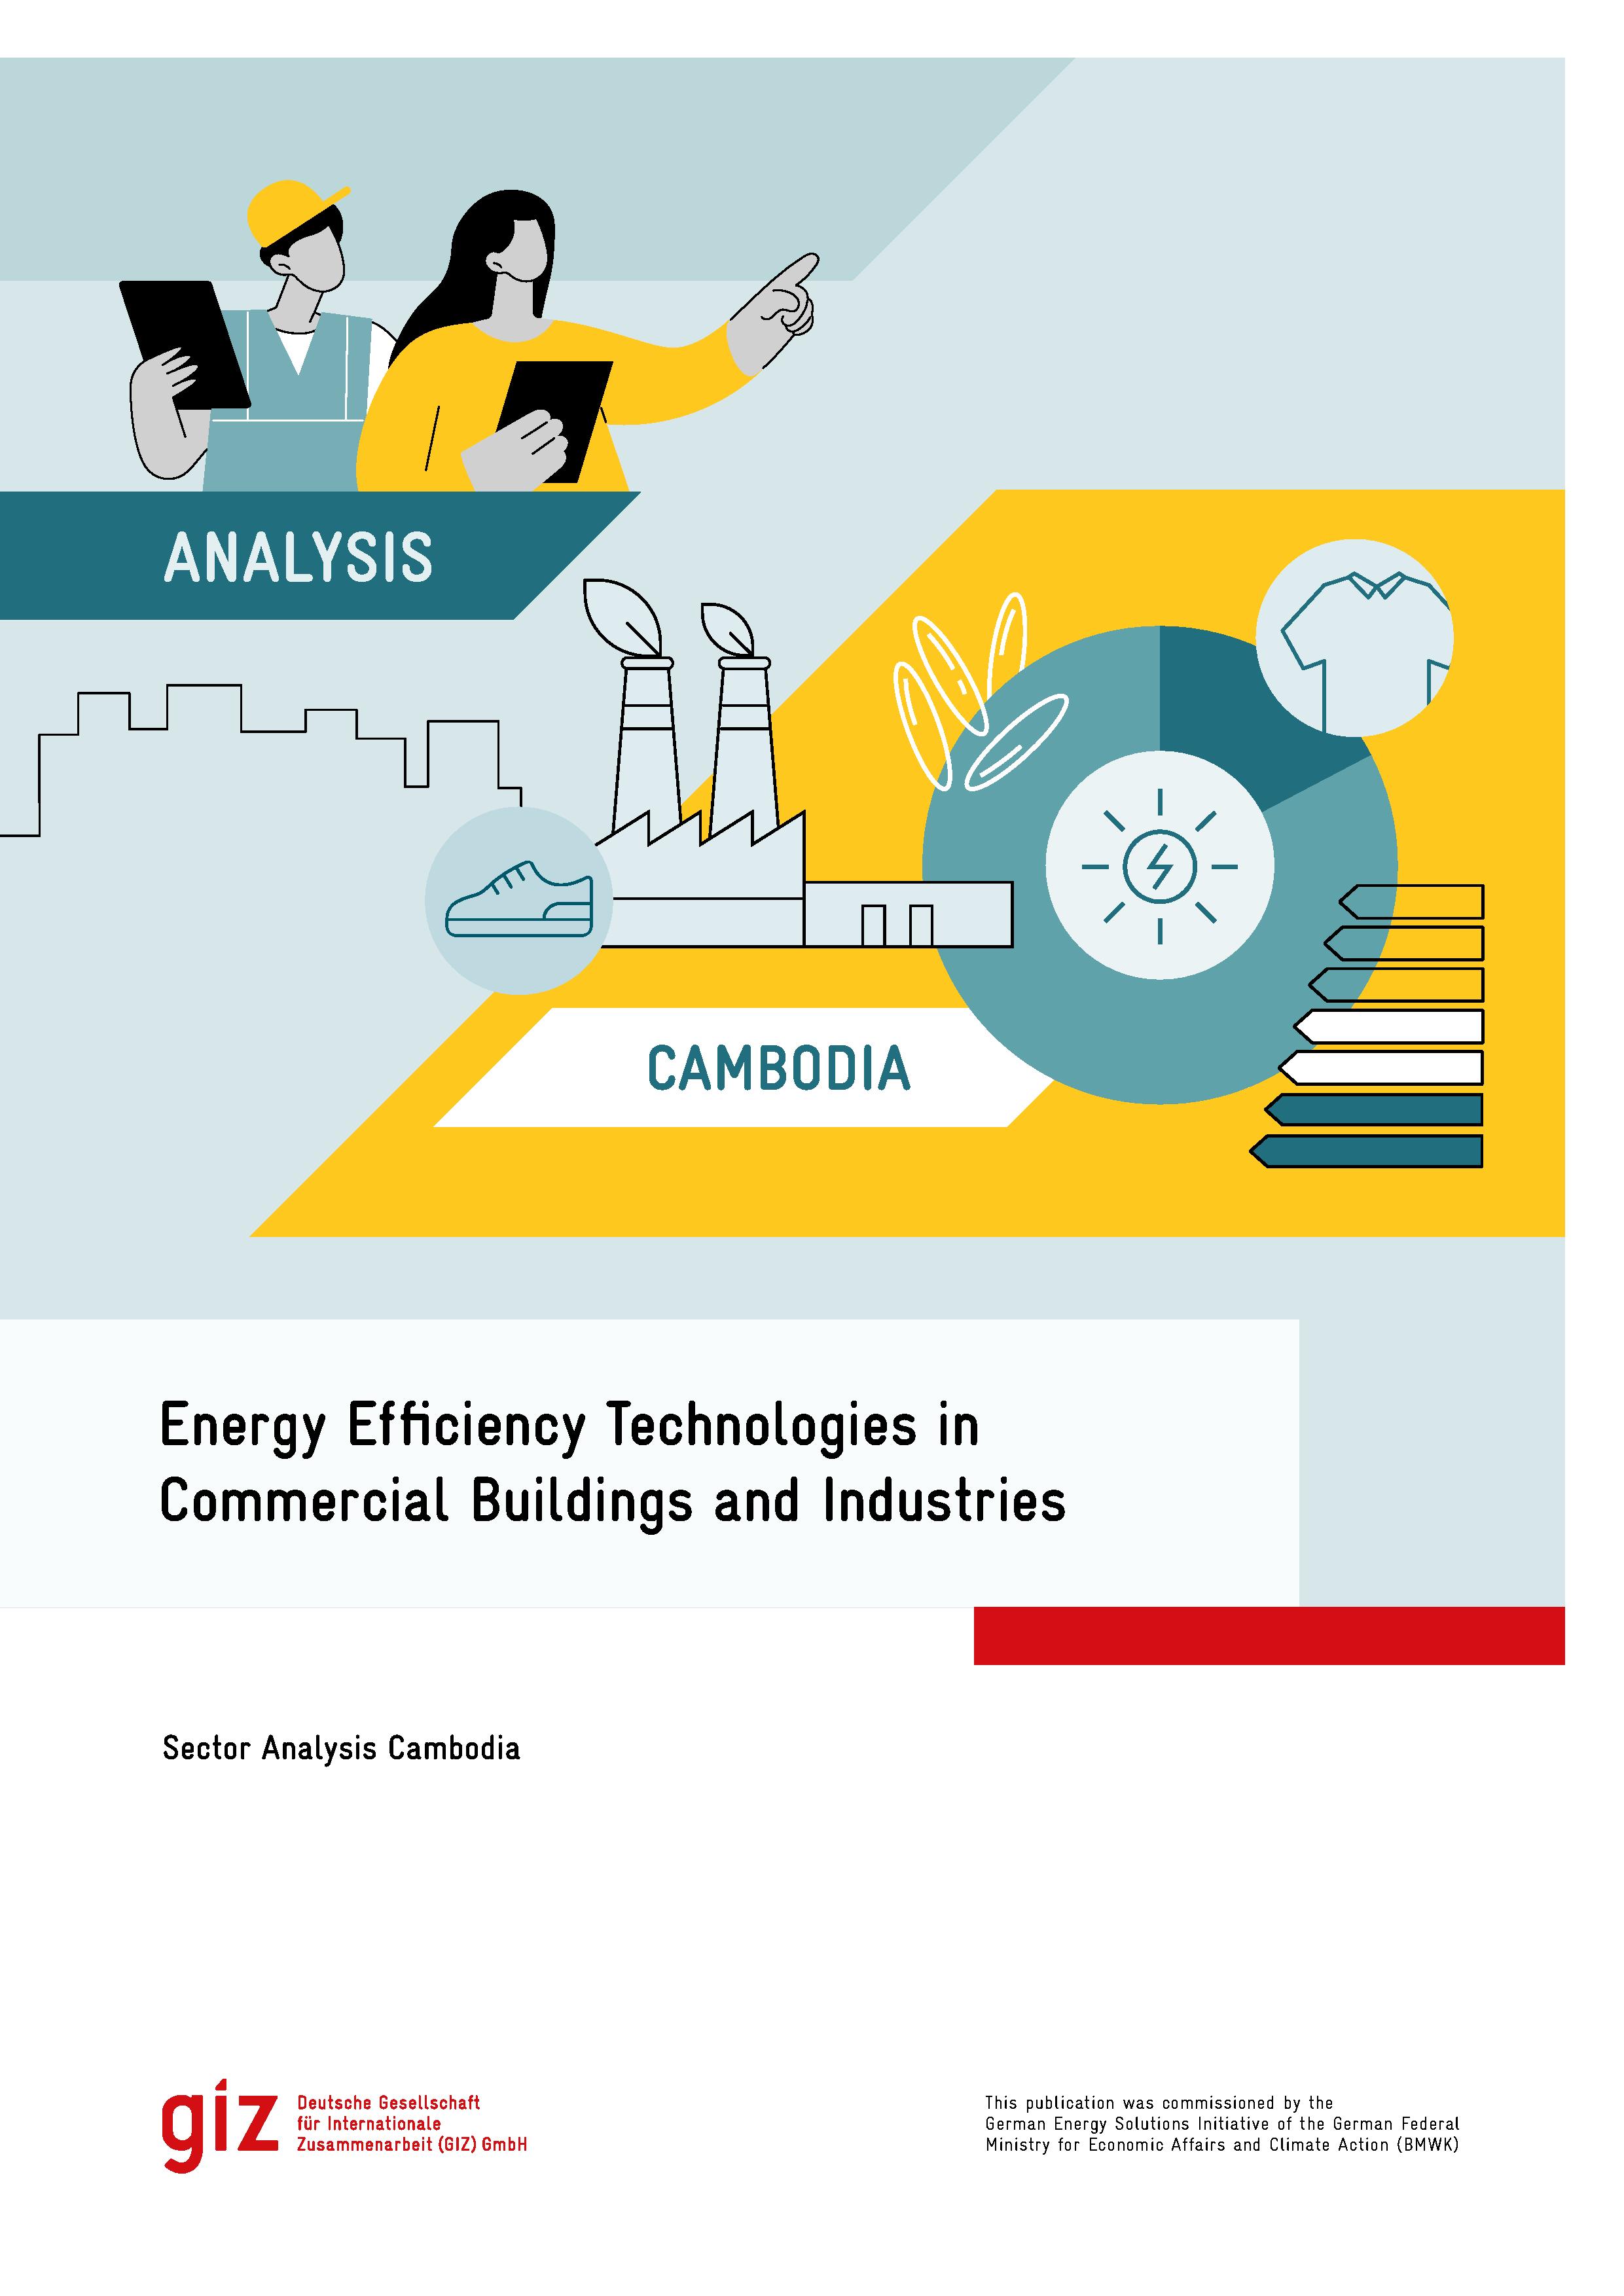 Energy Efficiency Technologies in Commercial Buildings and Industries in Cambodia